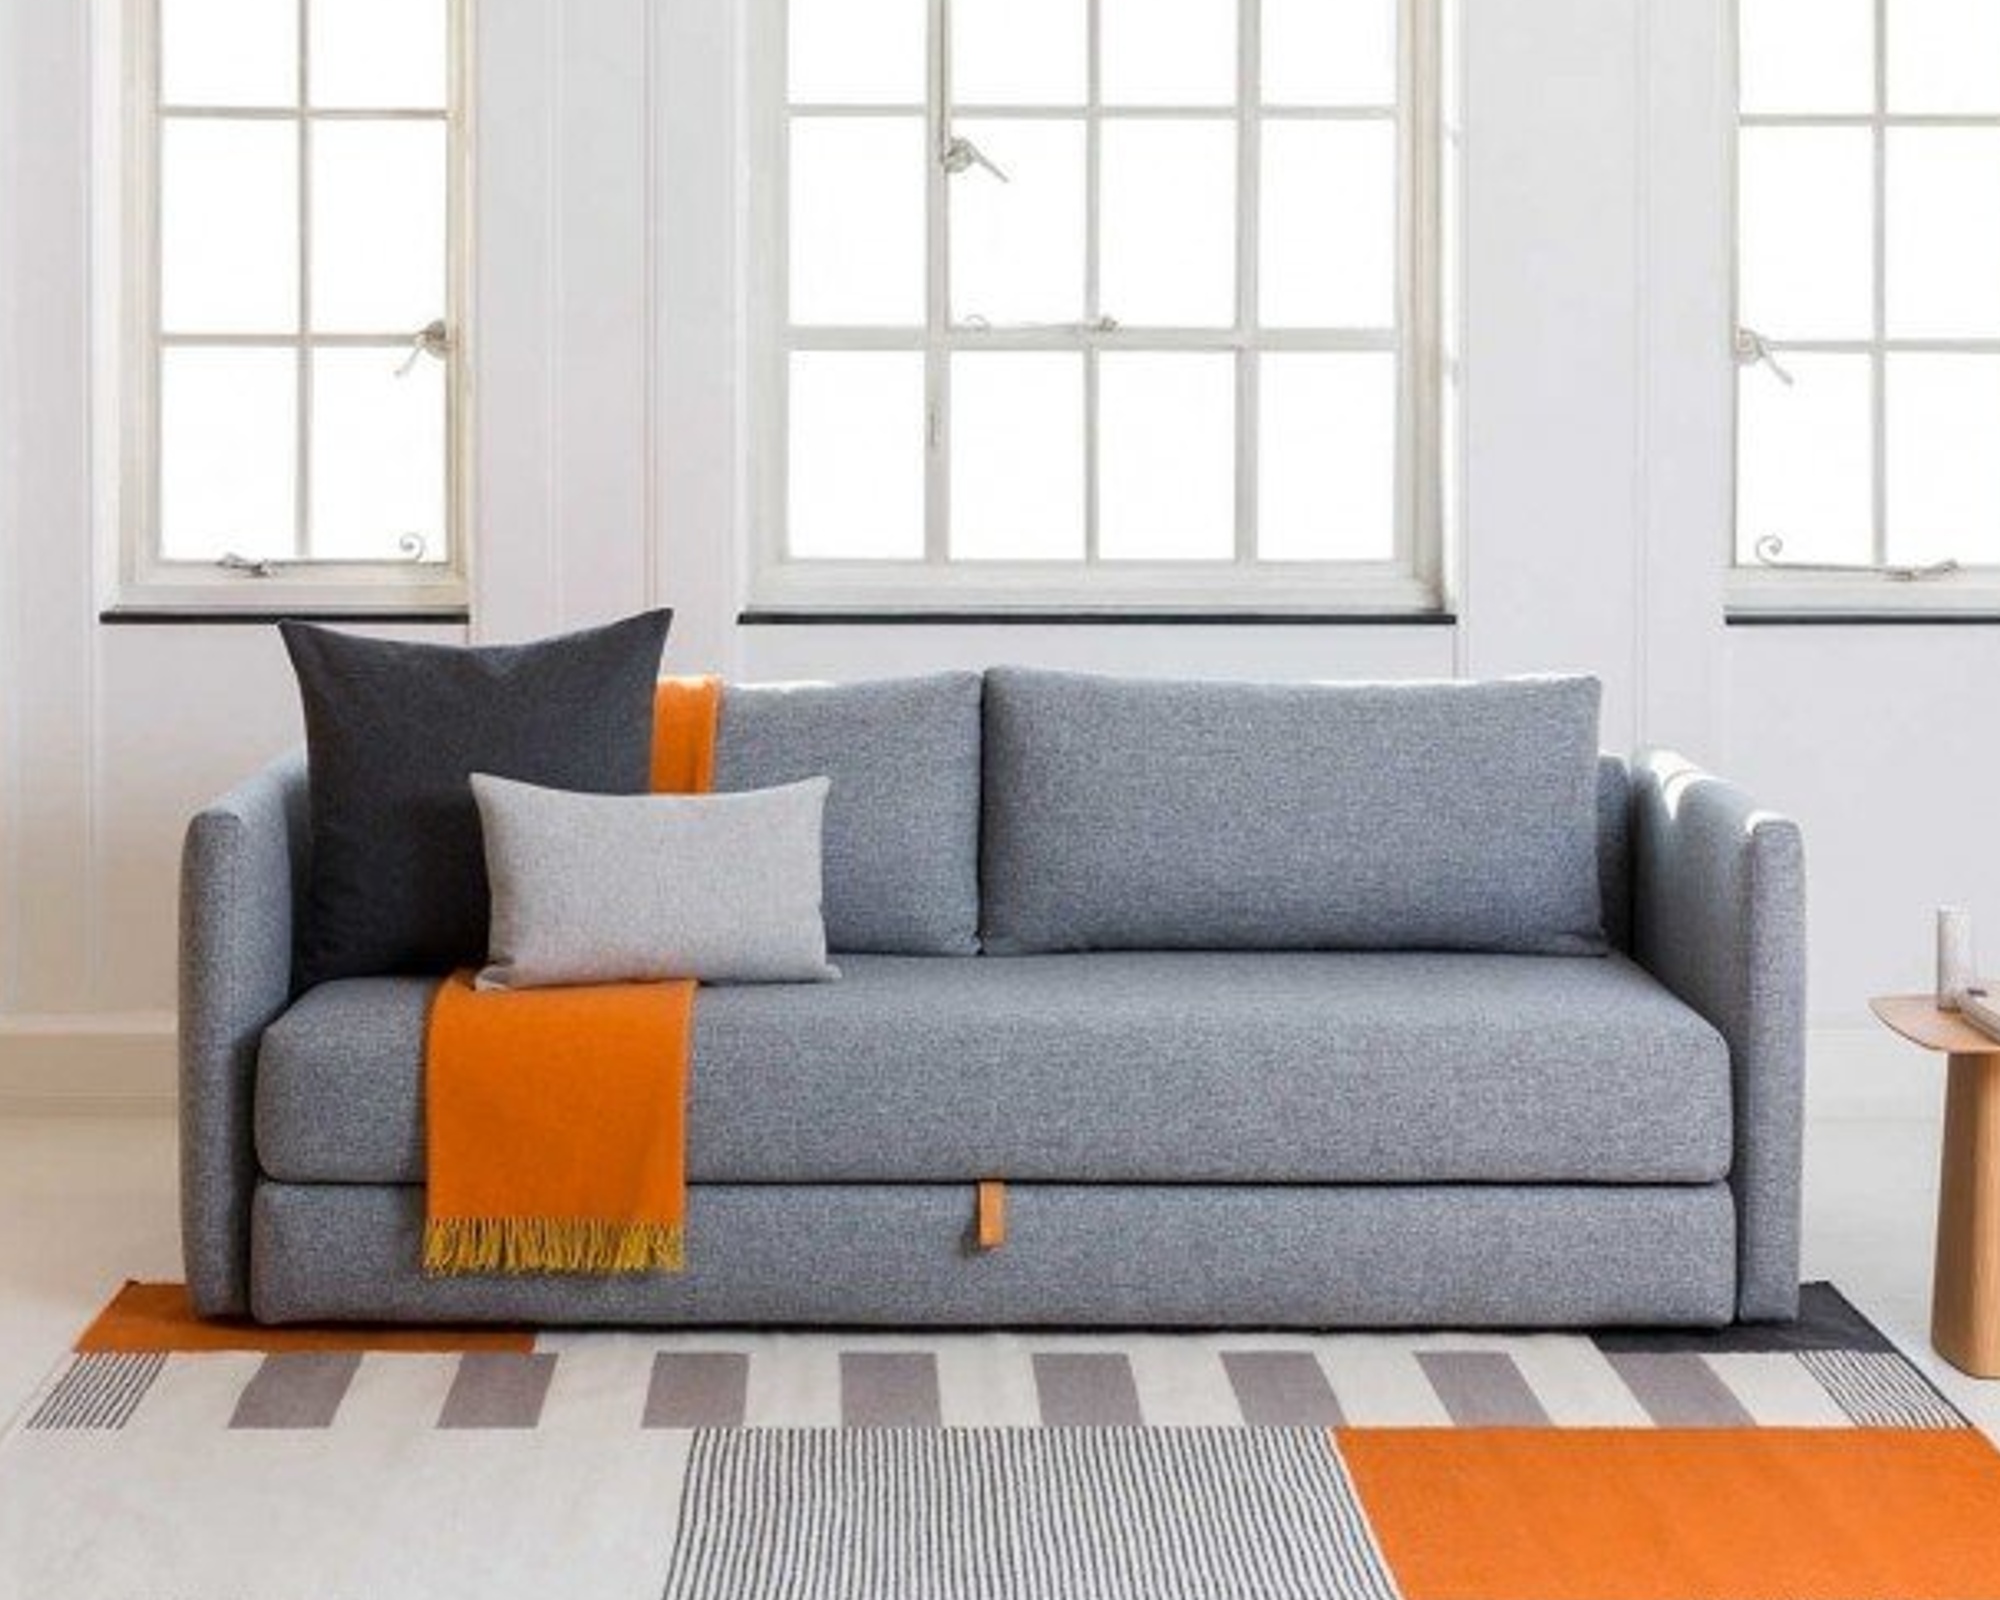 A grey sofa bed sat on a geometric orange patterned rug in front of three brightly lit living room windows